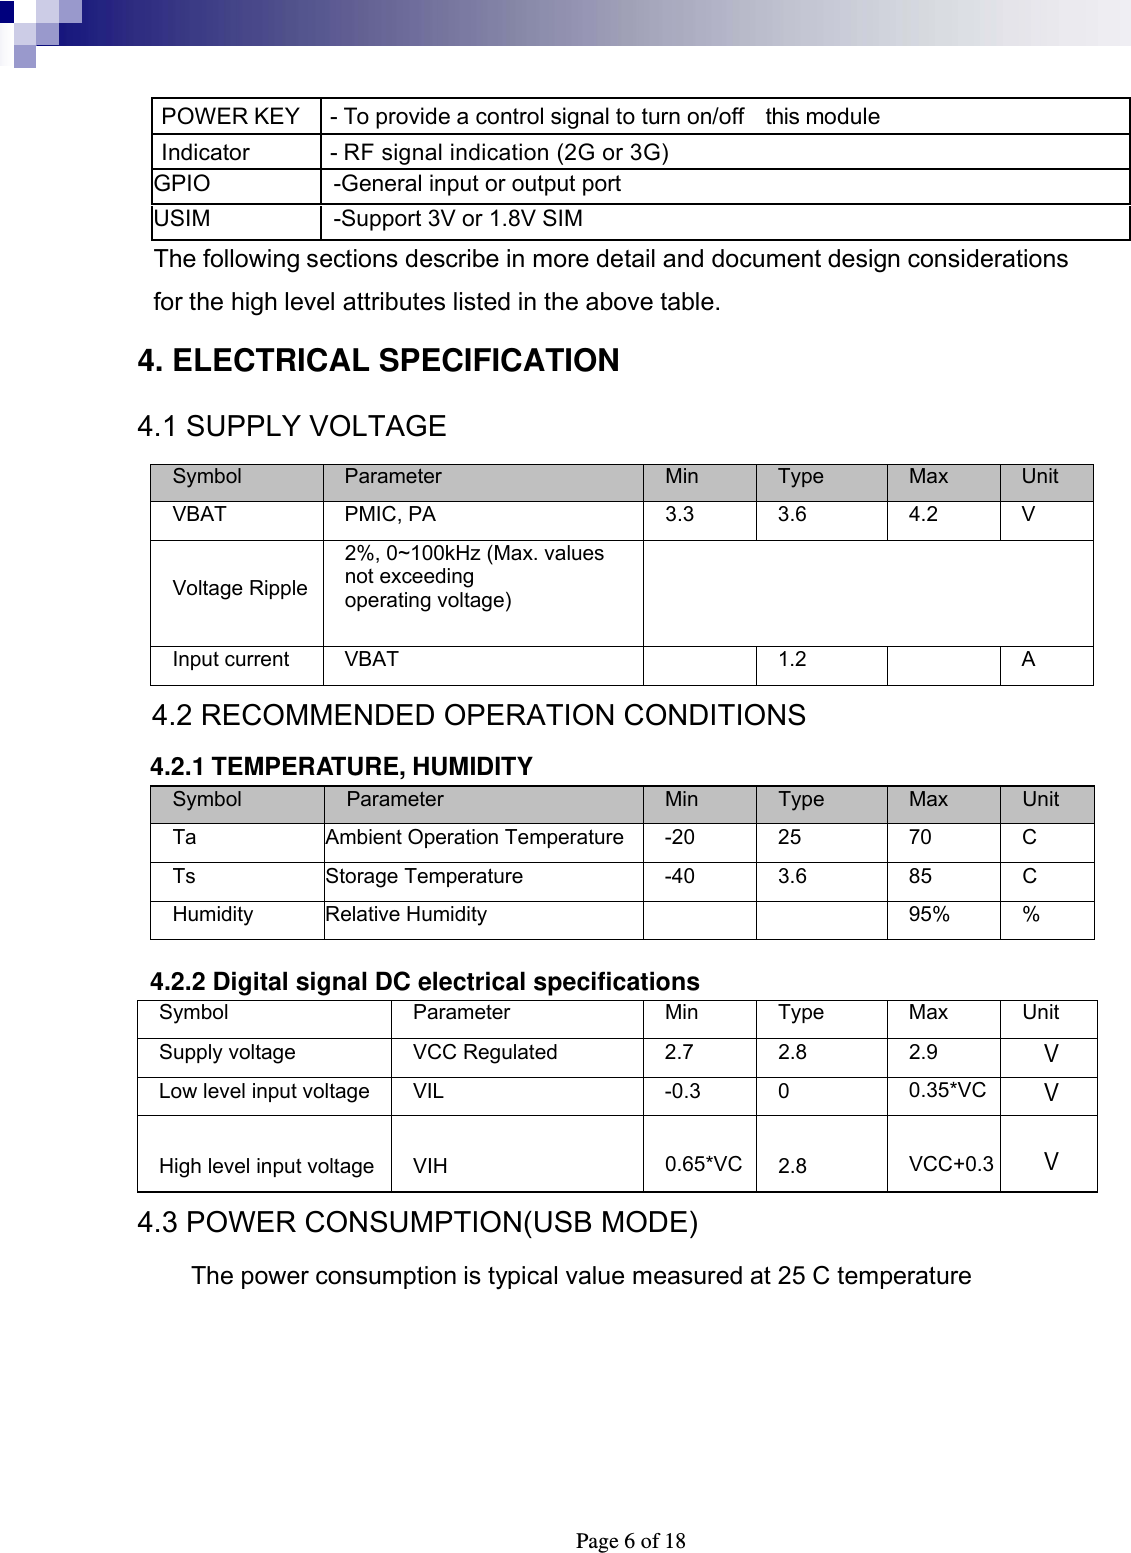  Page 6 of 18 POWER KEY  - To provide a control signal to turn on/off    this module Indicator  - RF signal indication (2G or 3G) GPIO  -General input or output port USIM    -Support 3V or 1.8V SIM The following sections describe in more detail and document design considerations for the high level attributes listed in the above table. 4. ELECTRICAL SPECIFICATION 4.1 SUPPLY VOLTAGE Symbol  Parameter  Min  Type  Max  Unit VBAT  PMIC, PA  3.3 3.6  4.2 V  Voltage Ripple 2%, 0~100kHz (Max. values not exceeding   operating voltage)  Input current VBAT   1.2  A   4.2 RECOMMENDED OPERATION CONDITIONS  4.2.1 TEMPERATURE, HUMIDITY Symbol  Parameter  Min  Type  Max  Unit Ta  Ambient Operation Temperature  -20  25  70  C Ts Storage Temperature  -40 3.6 85 C Humidity Relative Humidity      95% %    4.2.2 Digital signal DC electrical specifications Symbol Parameter Min Type Max Unit Supply voltage  VCC Regulated  2.7  2.8  2.9 VLow level input voltage  VIL  -0.3  0  0.35*VCV High level input voltage VIH  0.65*VC 2.8  VCC+0.3  V 4.3 POWER CONSUMPTION(USB MODE) The power consumption is typical value measured at 25 C temperature